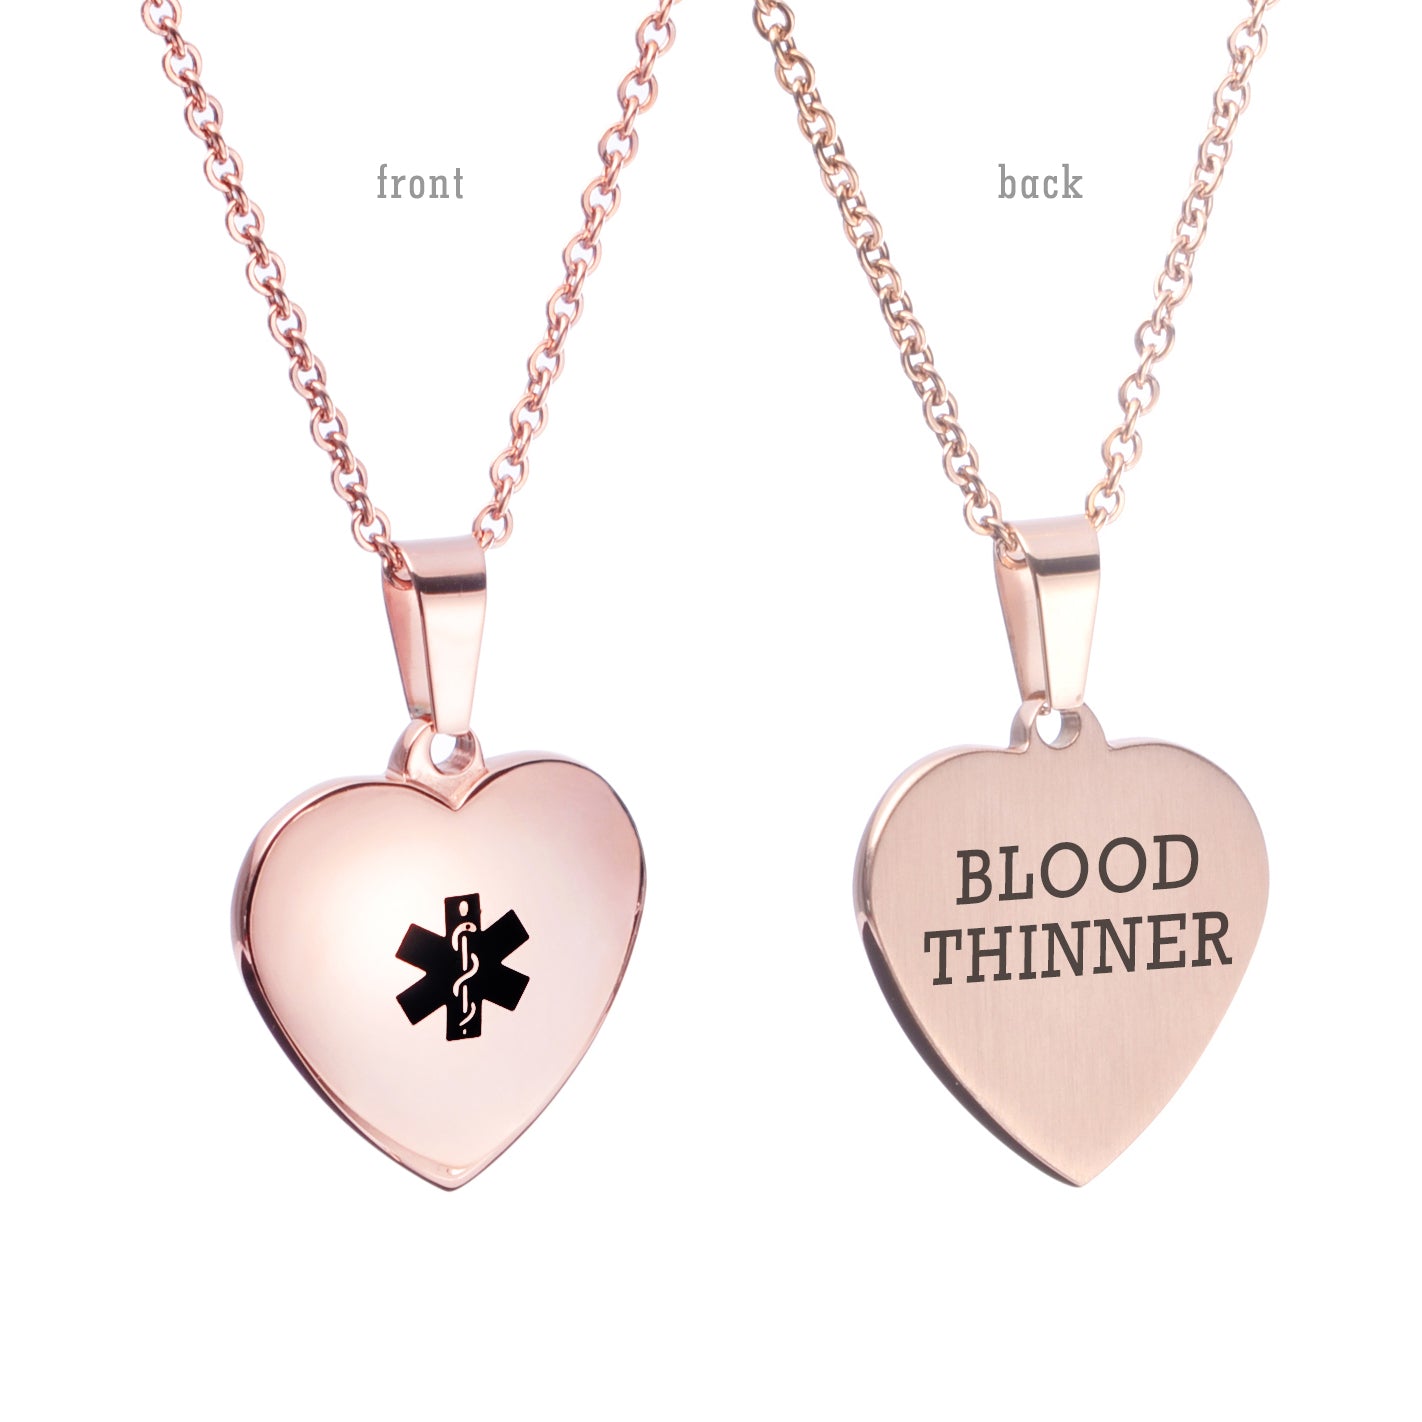 Heart Charm Medical alert id Necklaces for Women & Girl